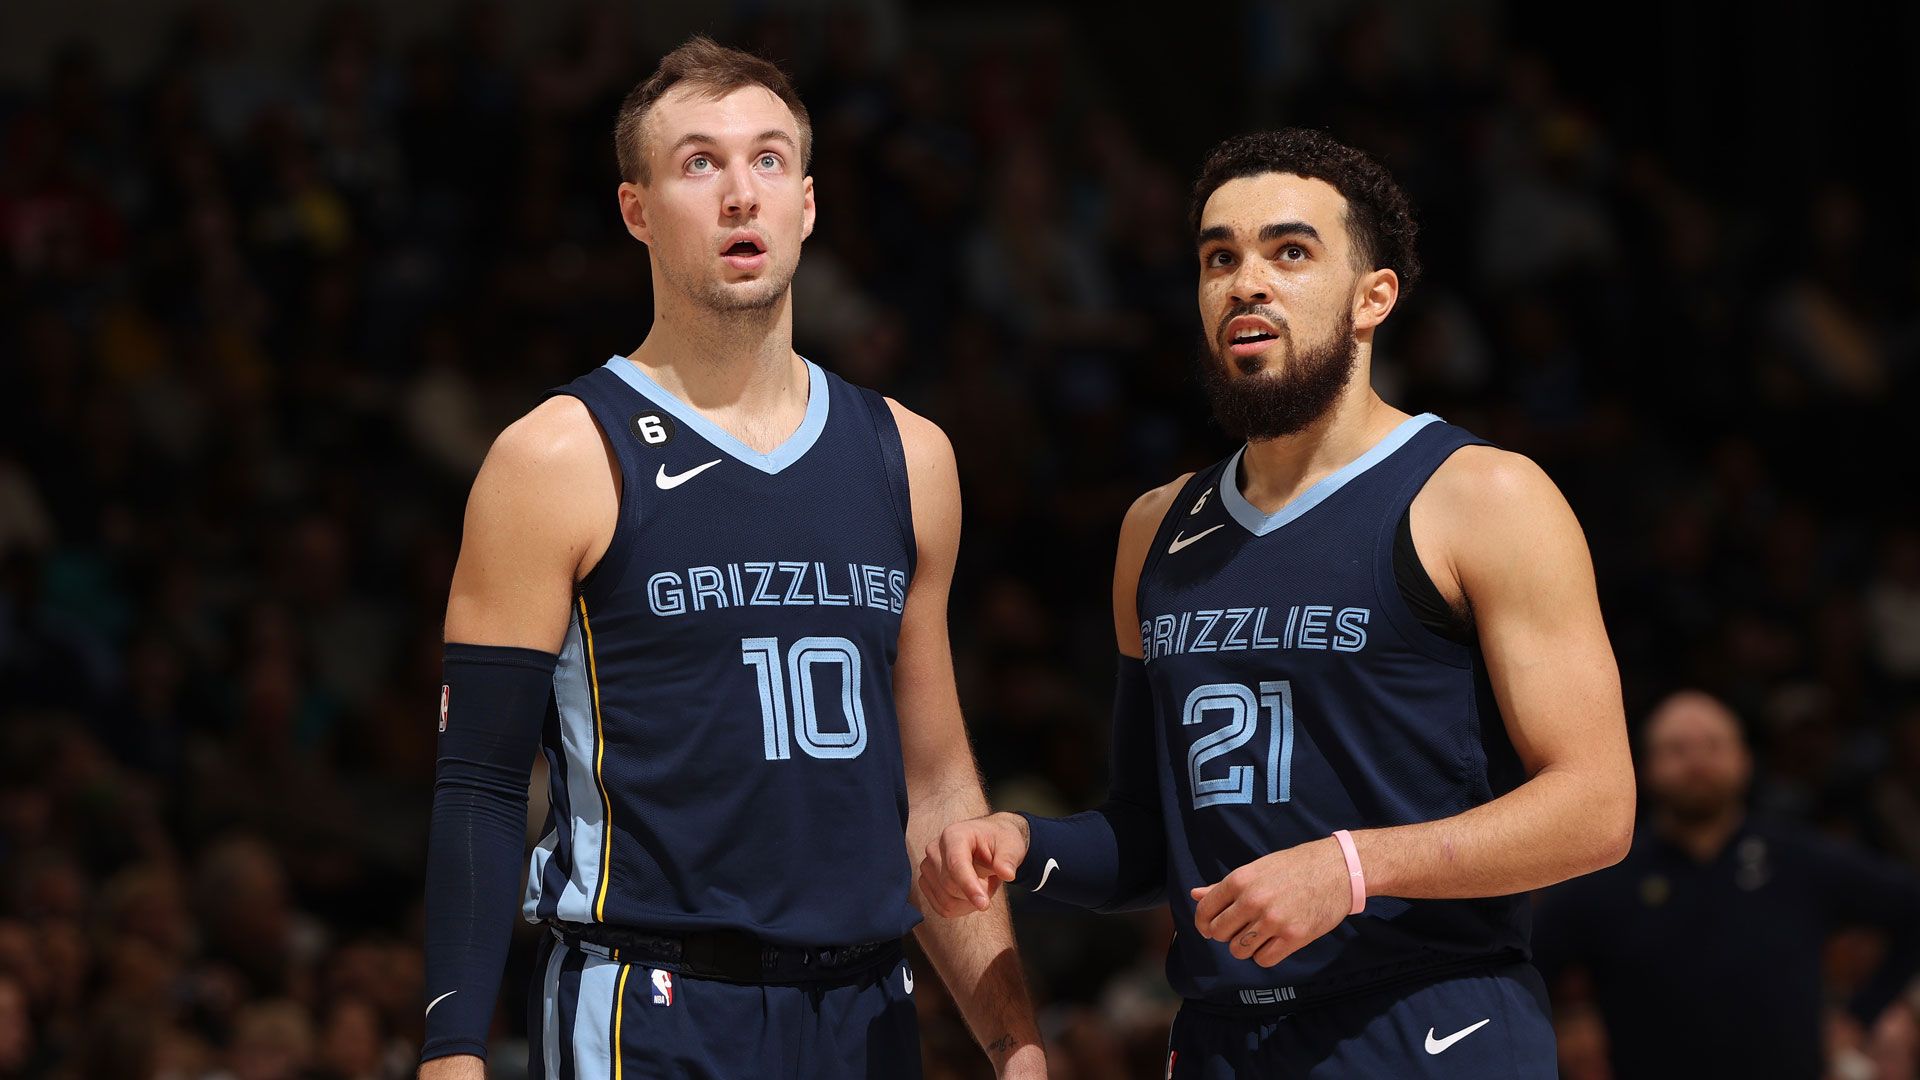 MEMPHIS, TN - MARCH 22: Luke Kennard #10 and Tyus Jones #21 of the Memphis Grizzlies looks on during the game on March 22, 2023 at FedExForum in Memphis, Tennessee.